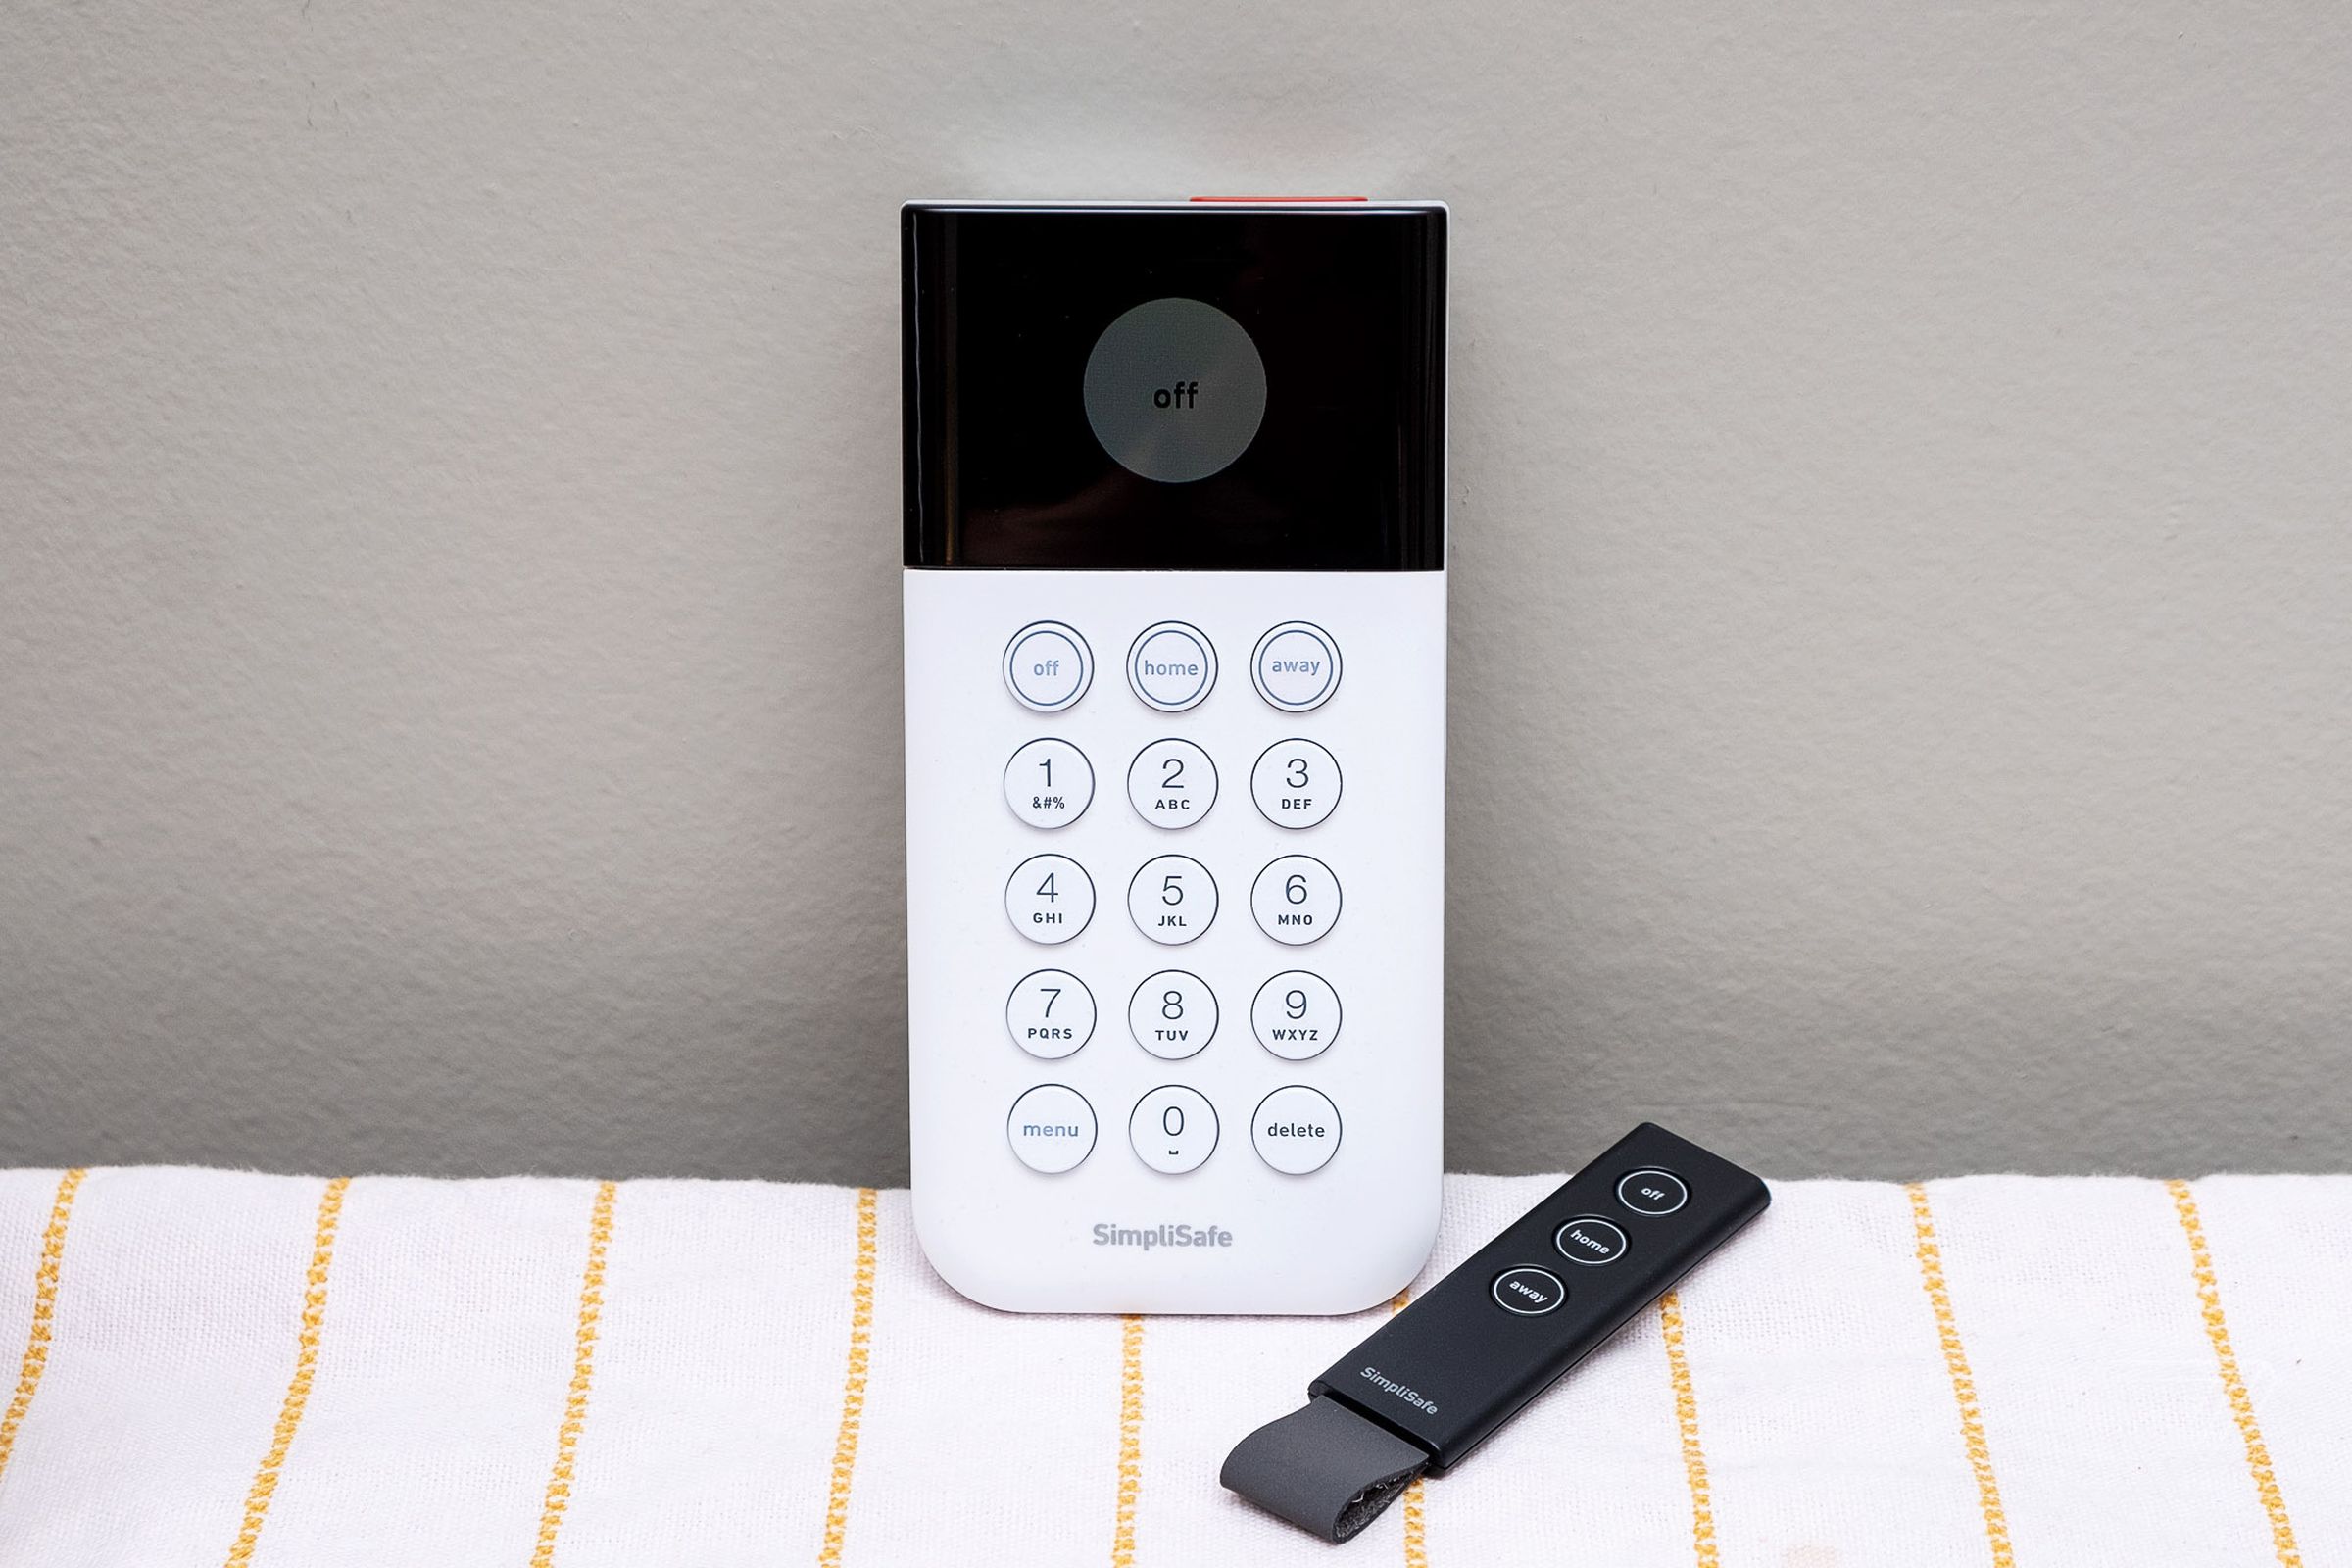 SimpliSafe’s battery-operated keypad and keyfob make arming and disarming the system very easy